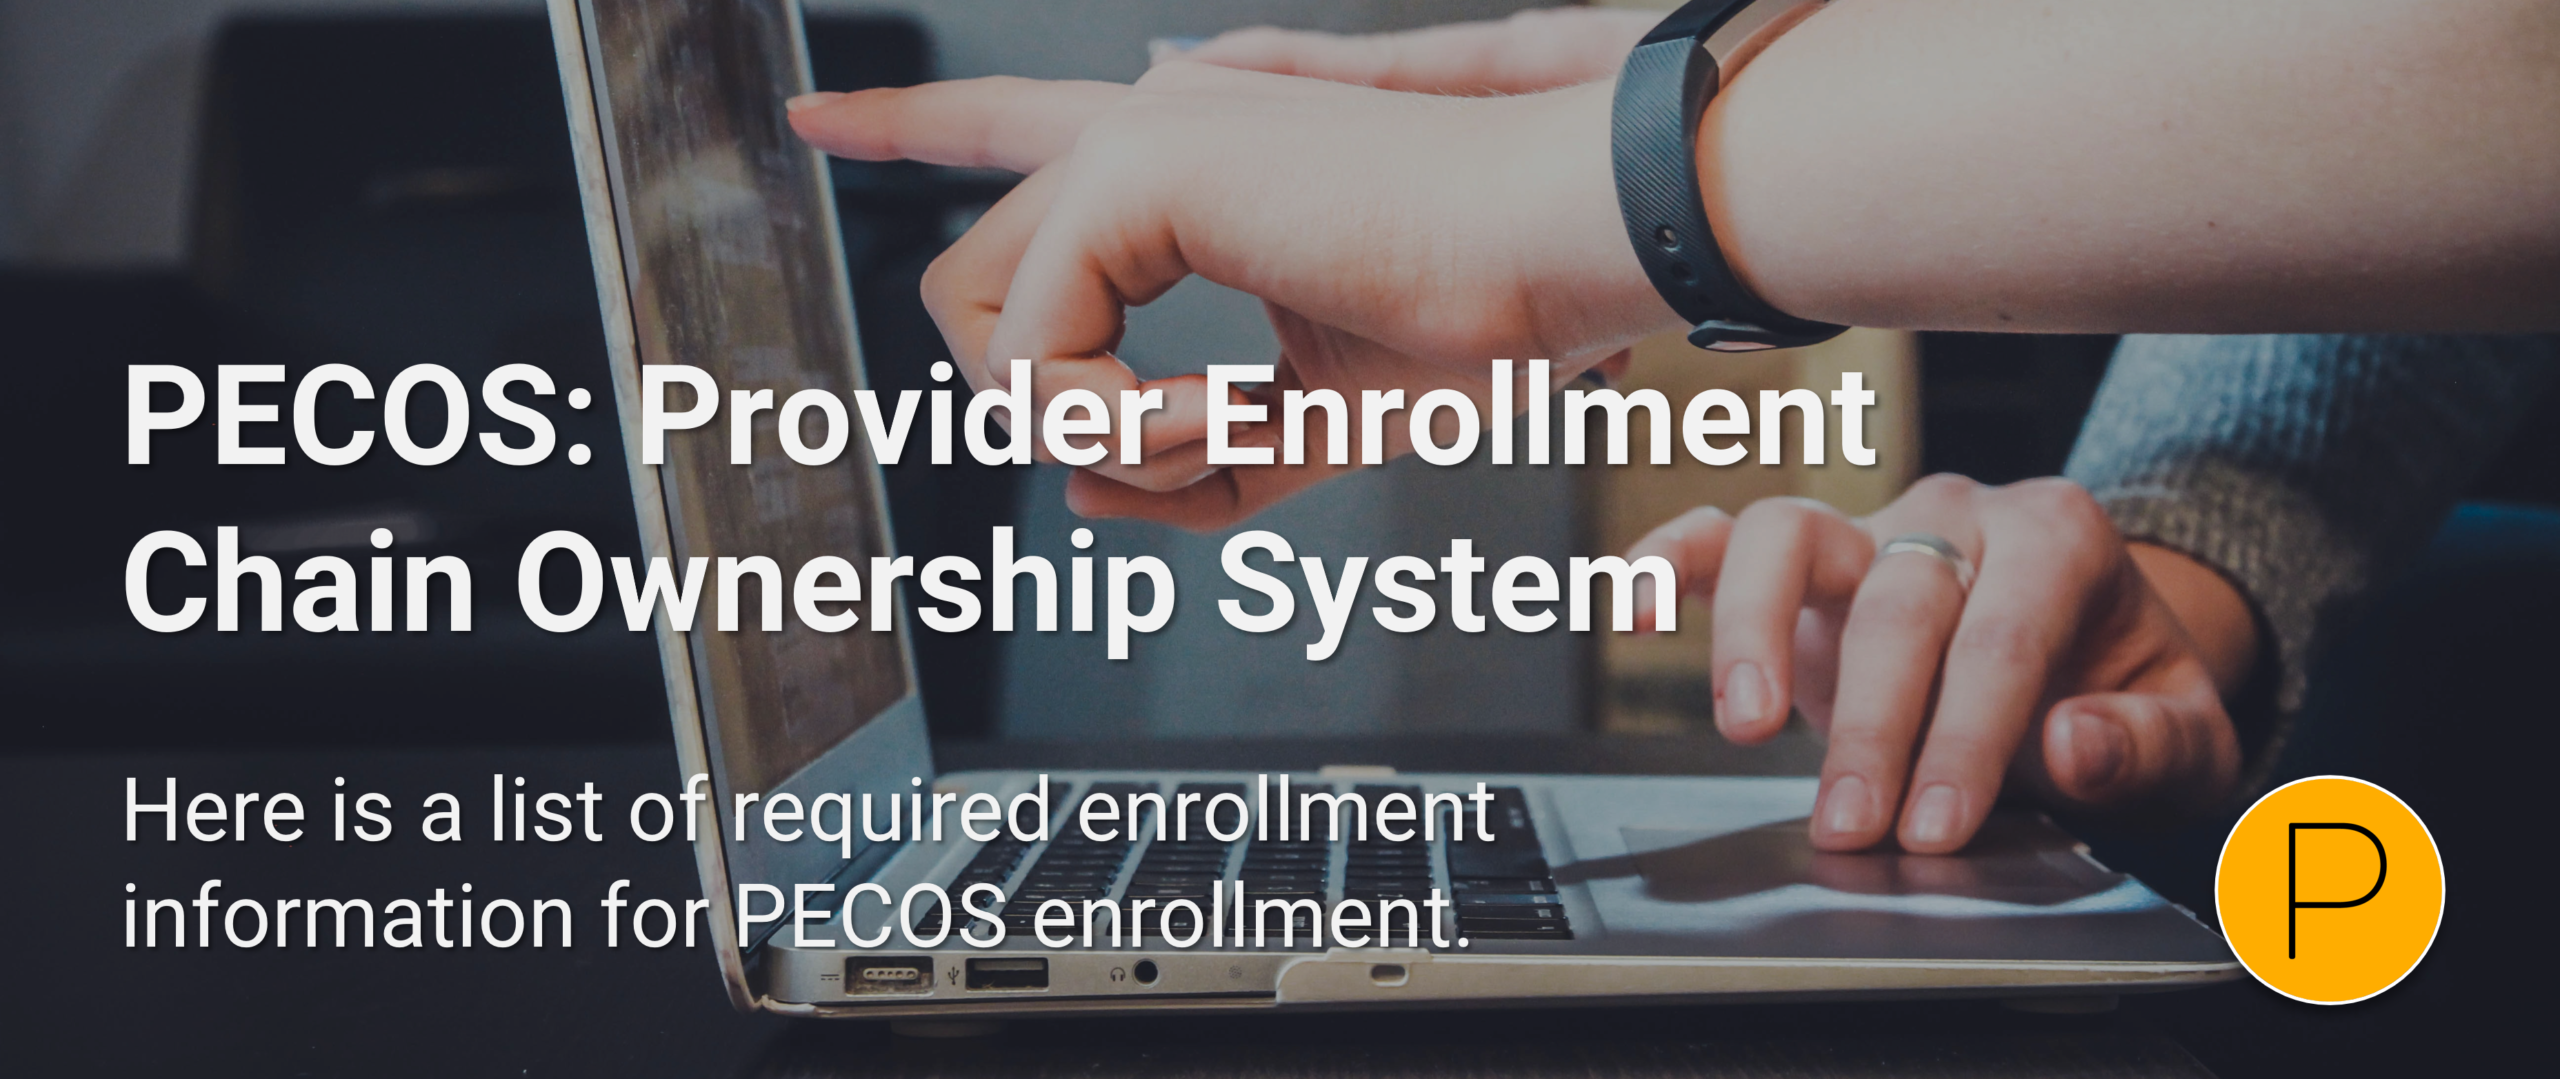 PECOS: Provider Enrollment Chain Ownership System Enrollment Requirements